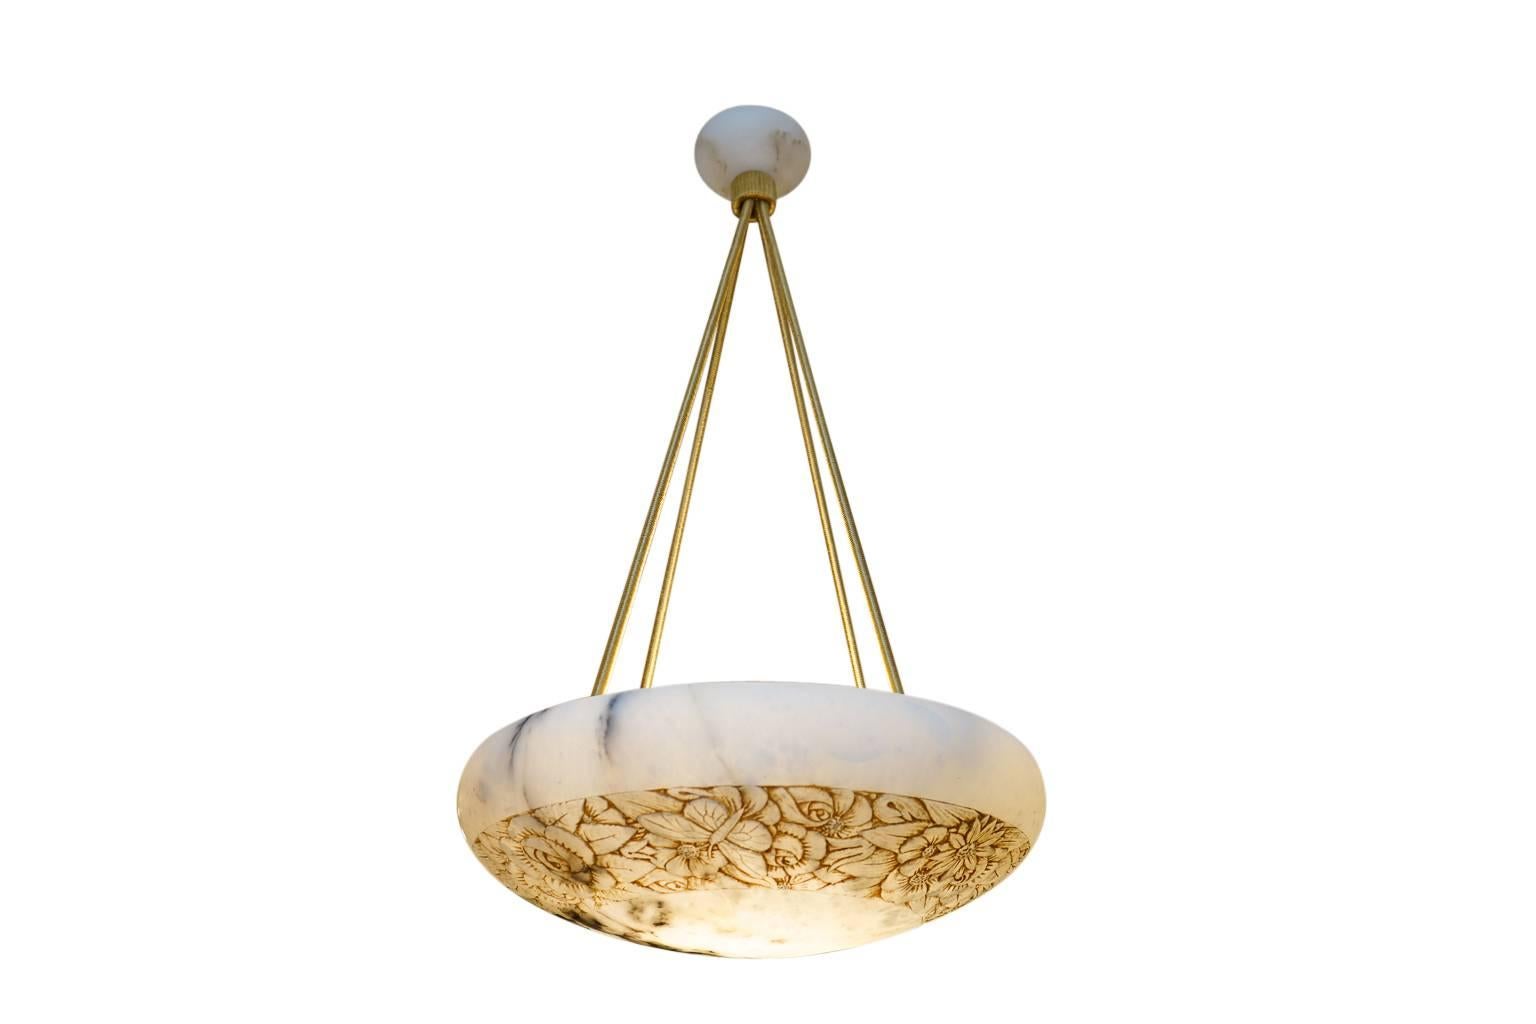 A seriously impressive pendant, carved of charcoal veined white alabaster with a thick centre band of intertwined flowers and butterflies give a light-hearted spin on a one-of-a-kind illuminated sculpture. Recently rewired, the light features a set